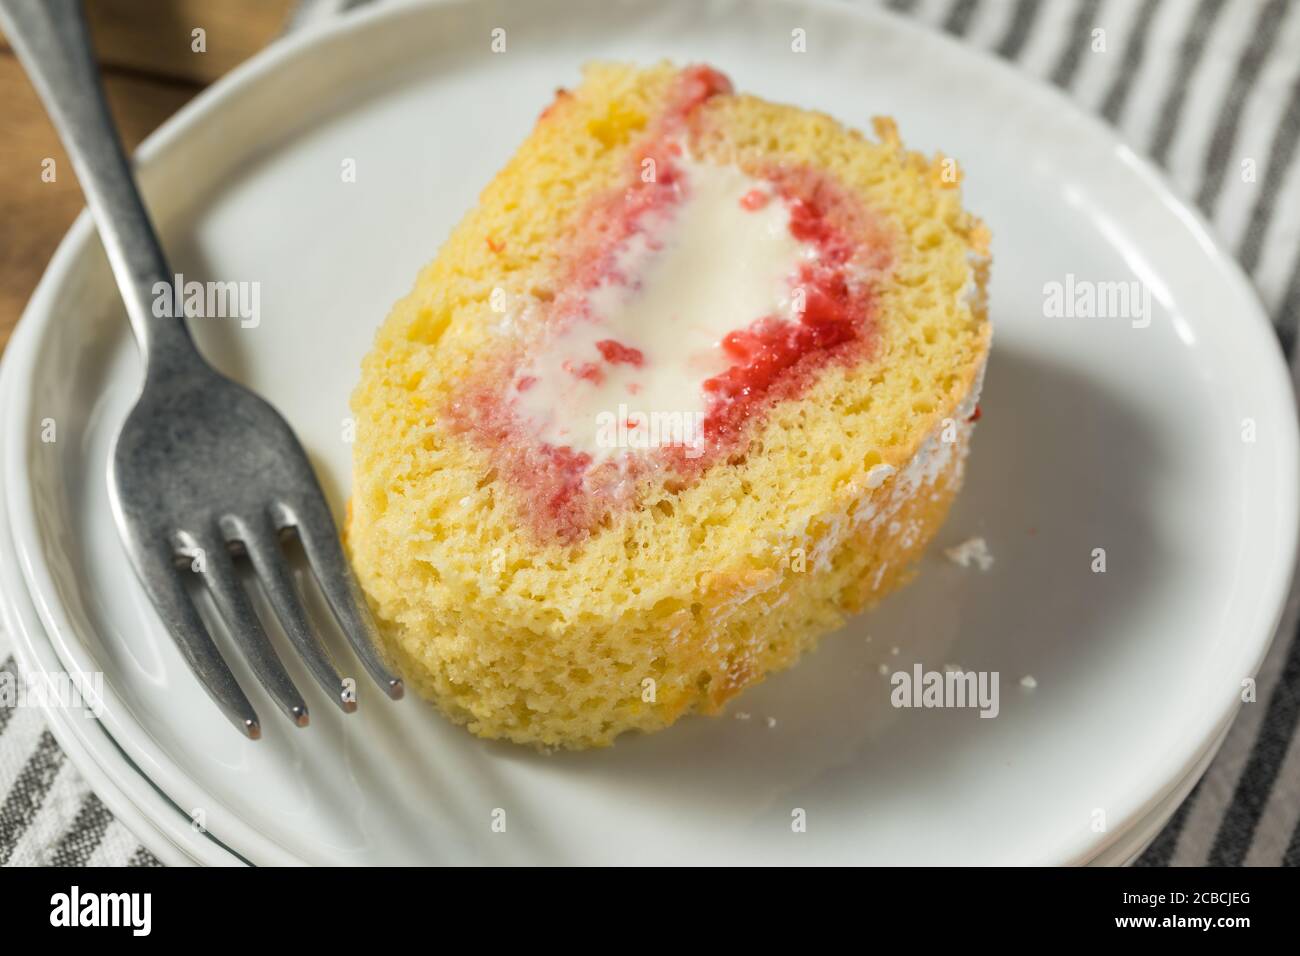 Homemade Frozen Artic Roll Cake with Ice Cream and Strawberries Stock Photo